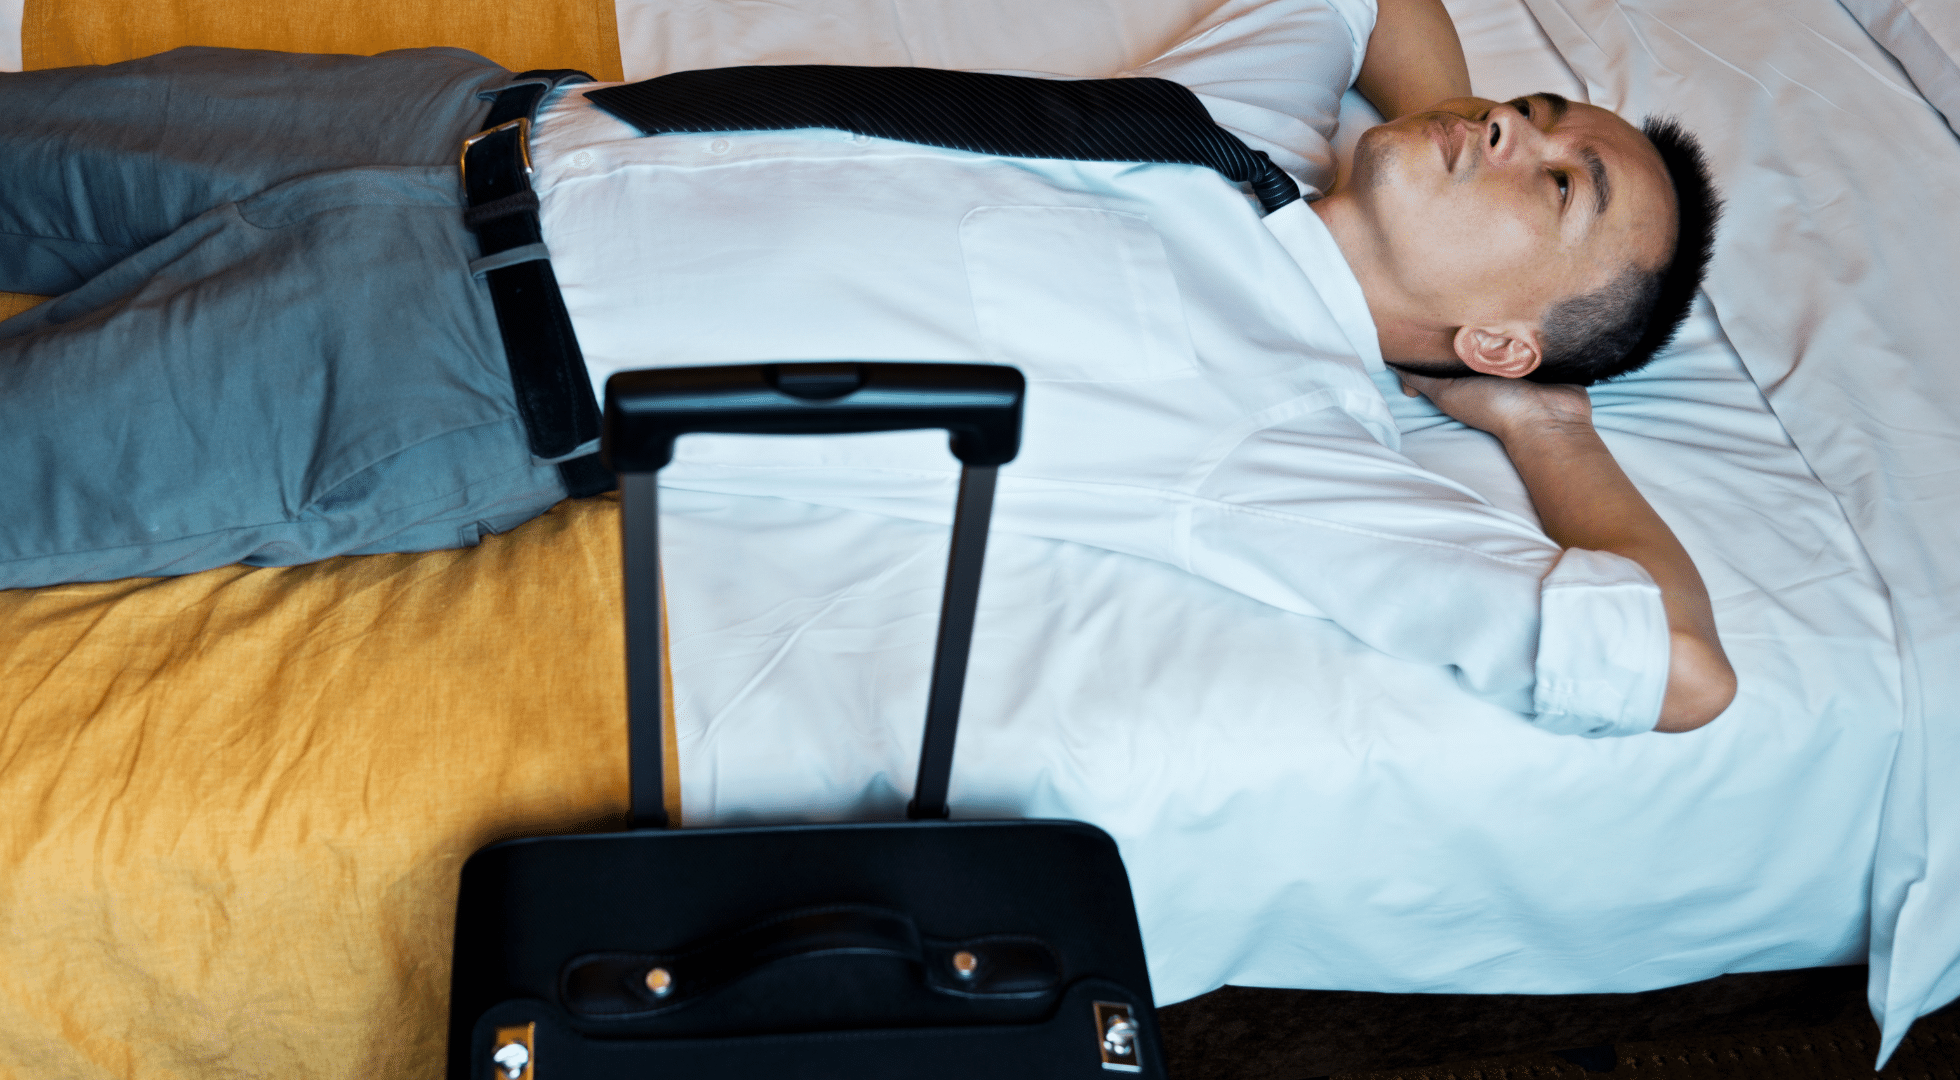 Business travel challenges can be tiring to deal with